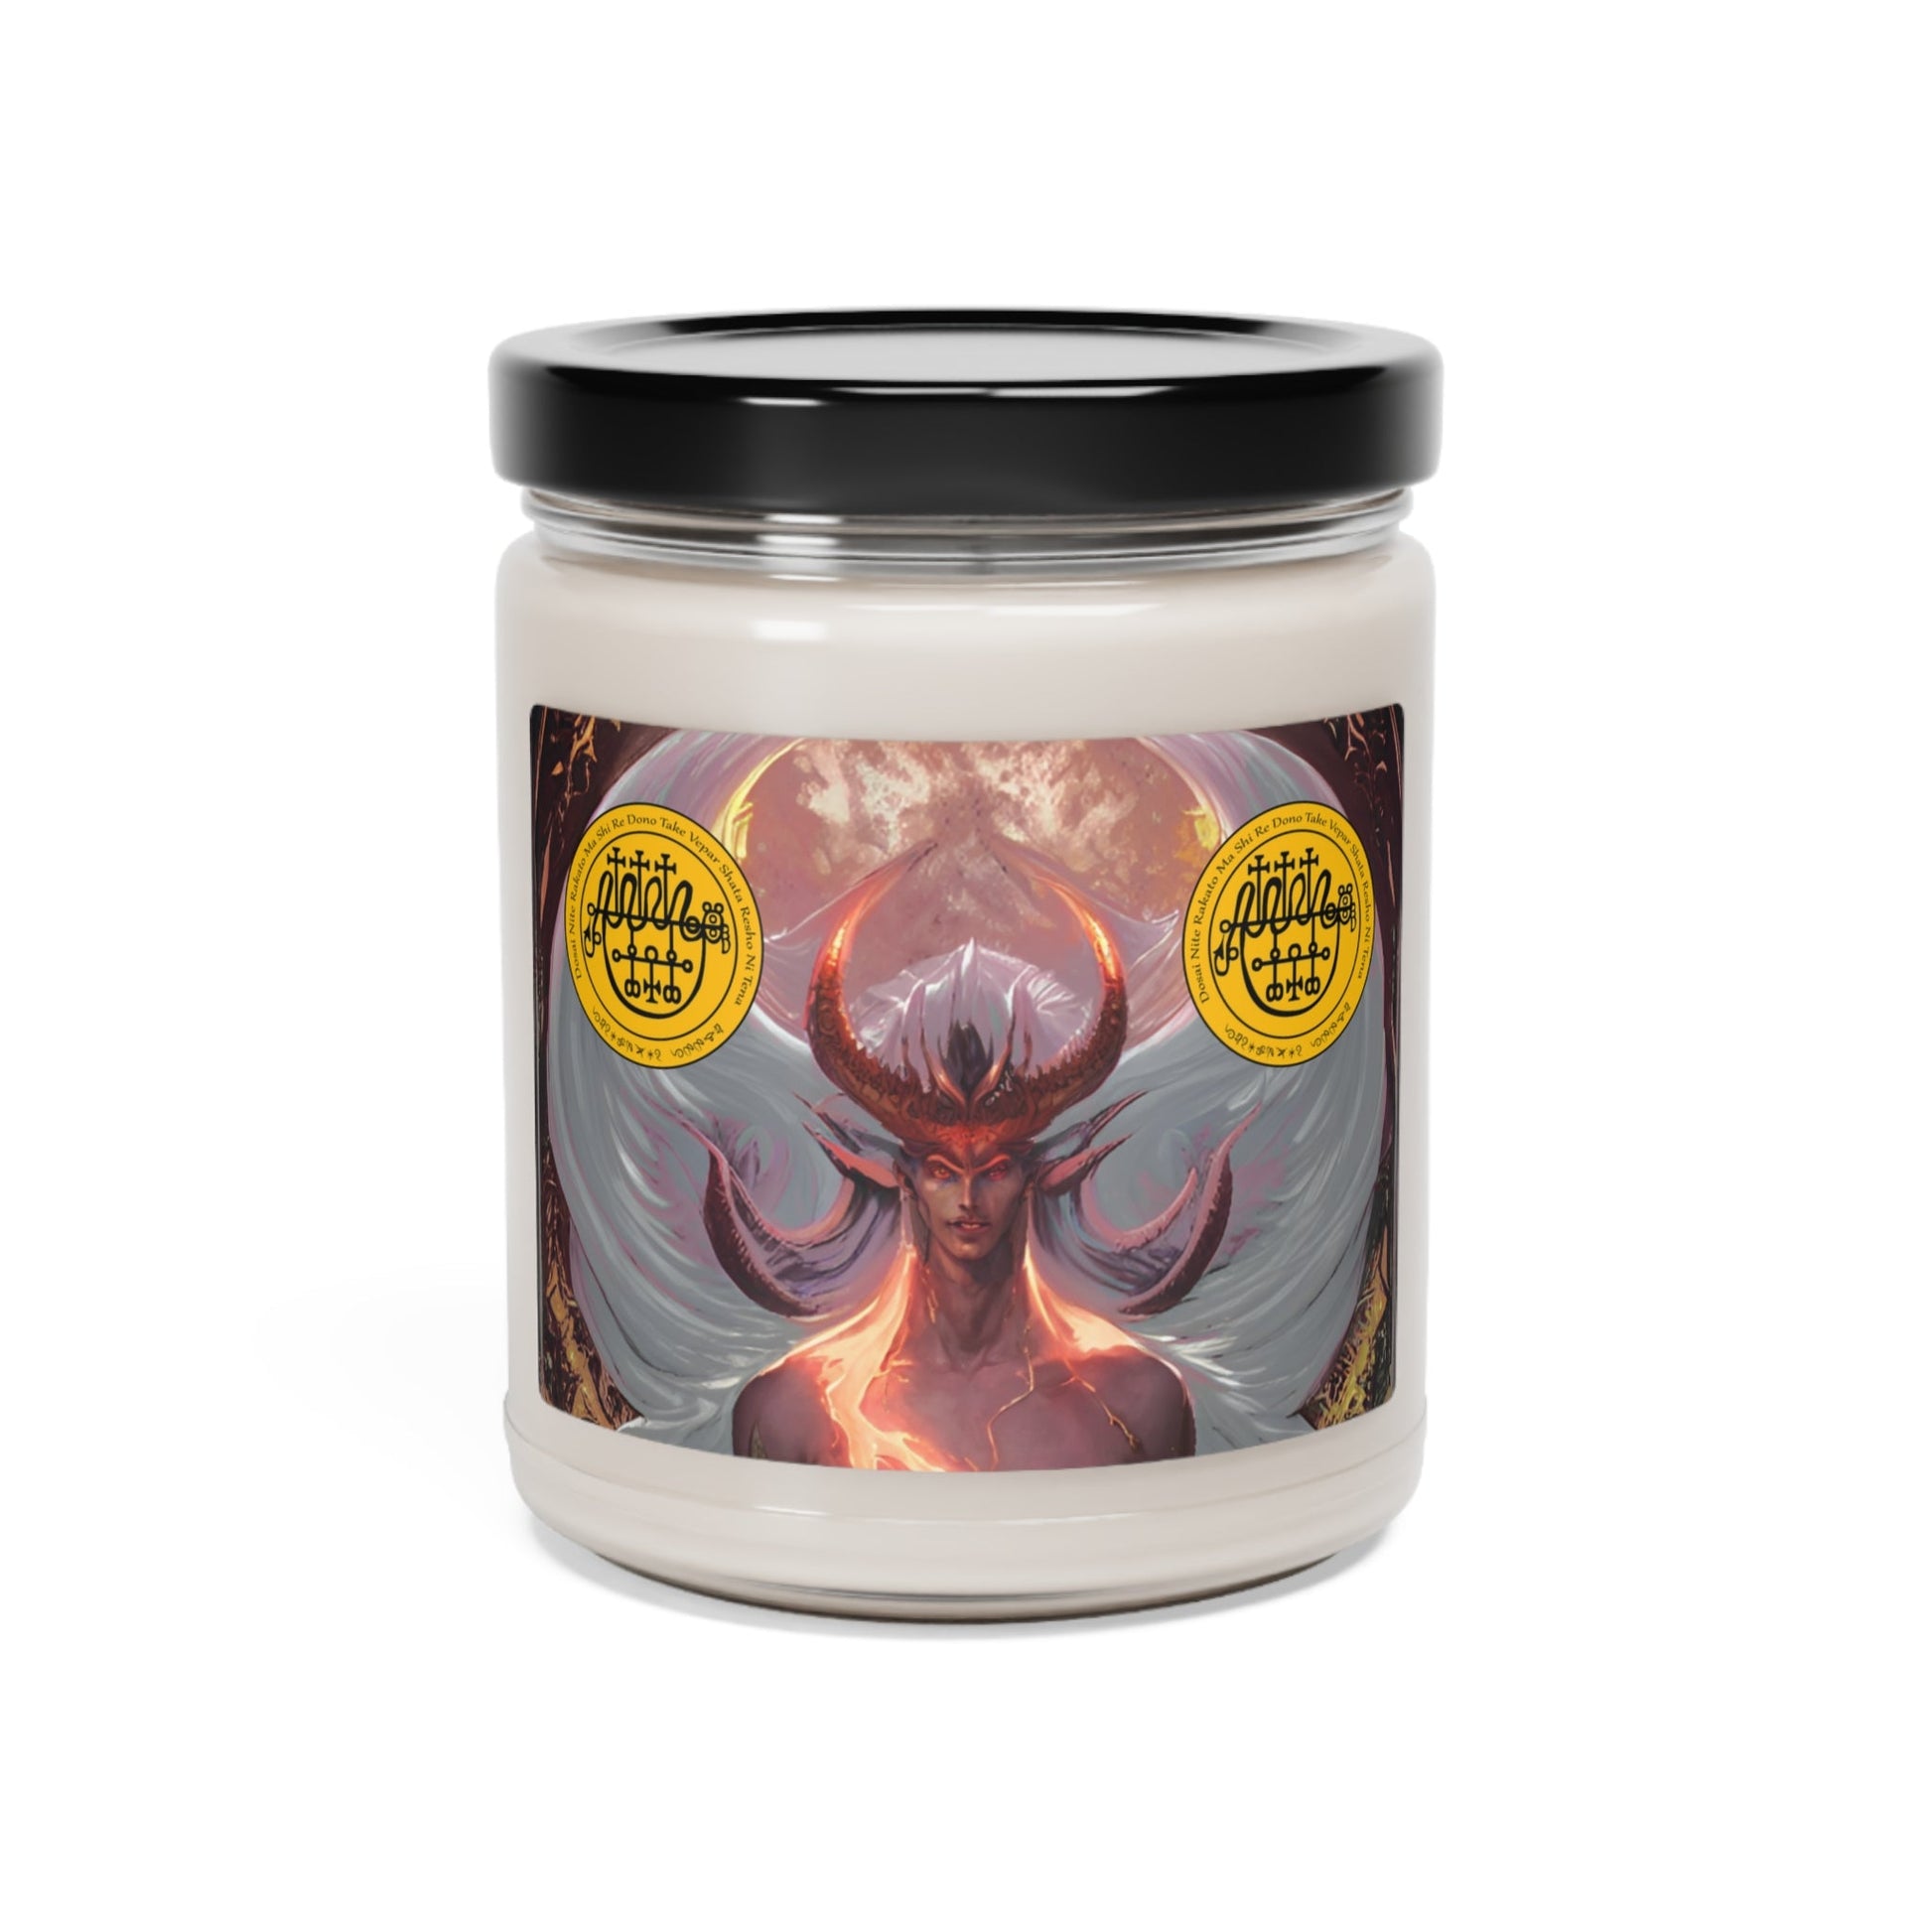 Demon-Vepar-Altar-Scented-Soy-Candle-for-offerings-rituals-initiations-or-praying-and-meditation-6